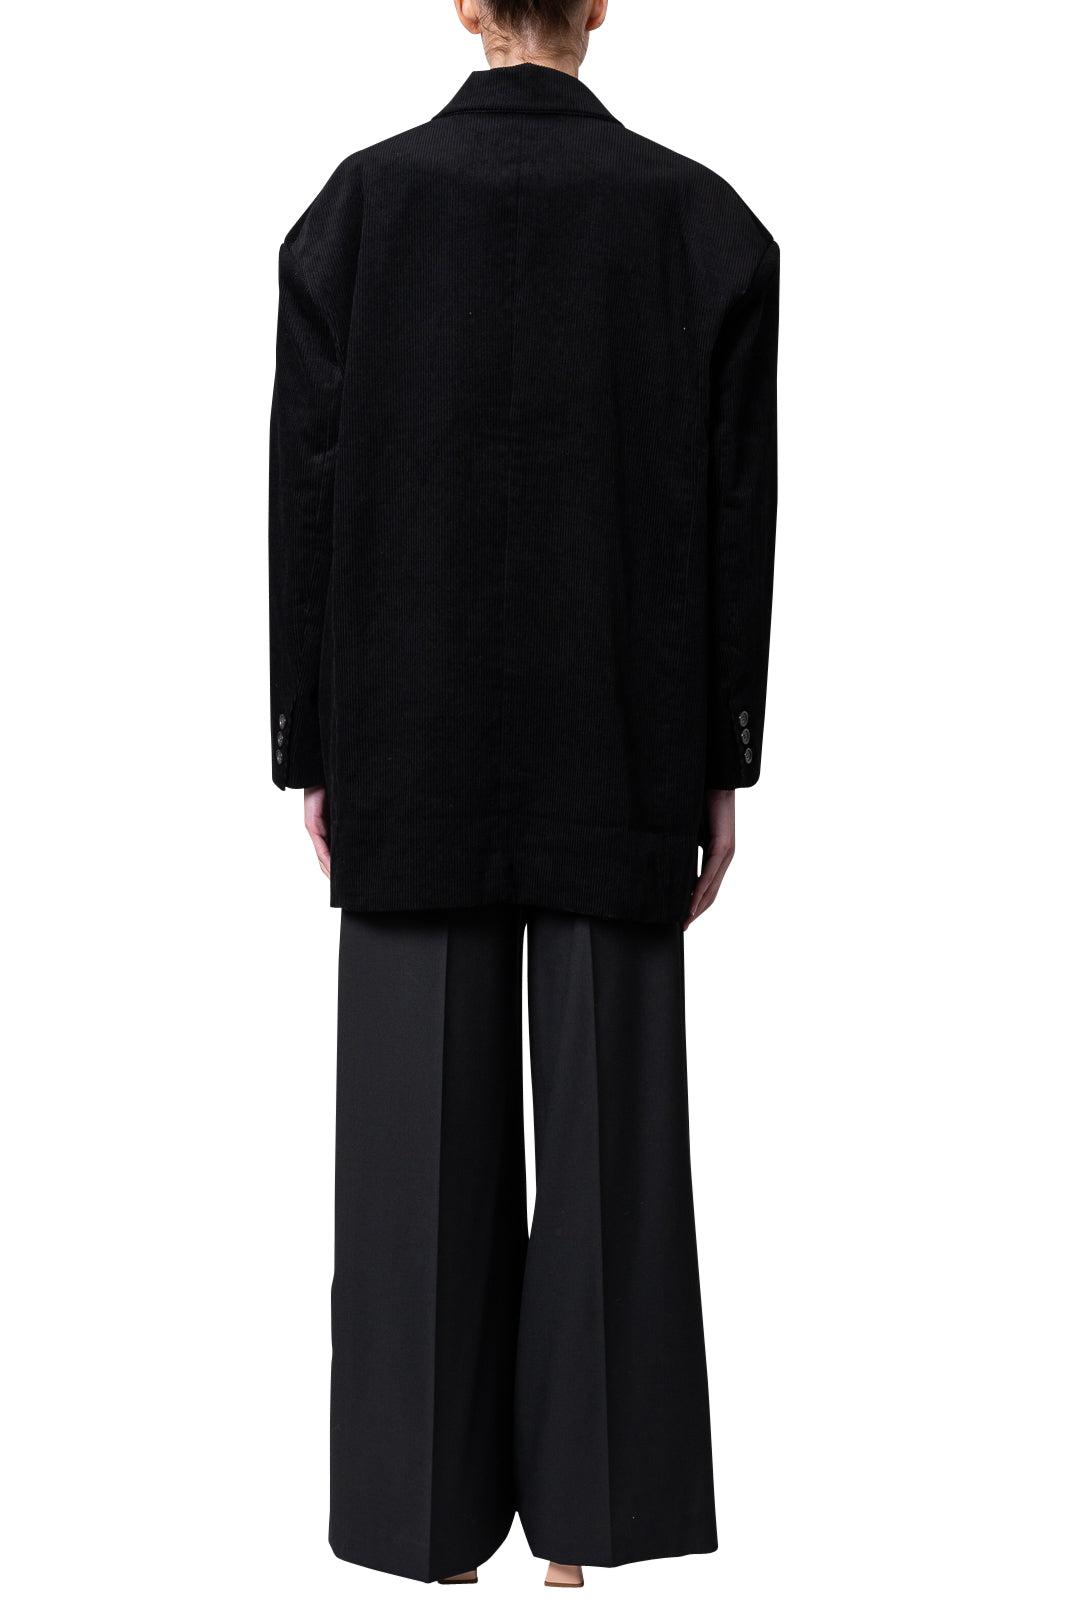 The Garment-Cannes Oversized Coat-19985-dgallerystore